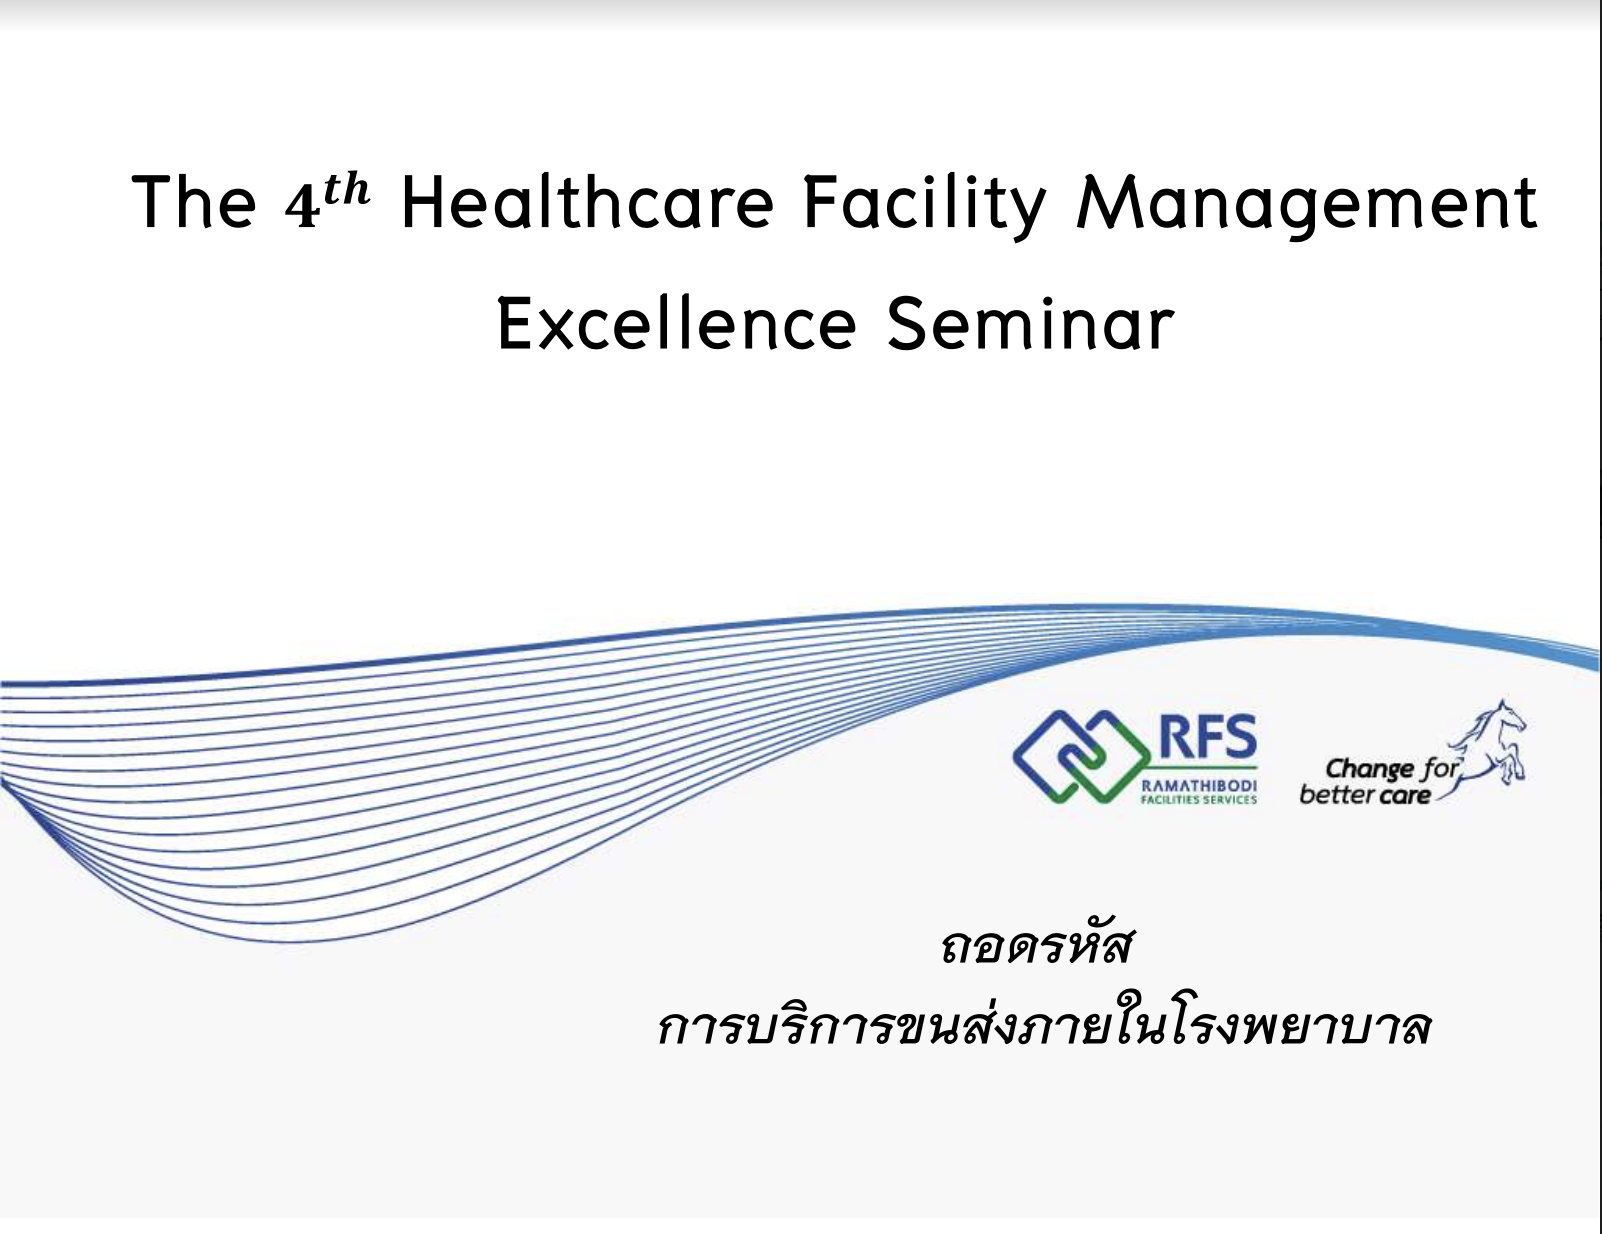 The 4th Healthcare Facility Management Excellence Seminar